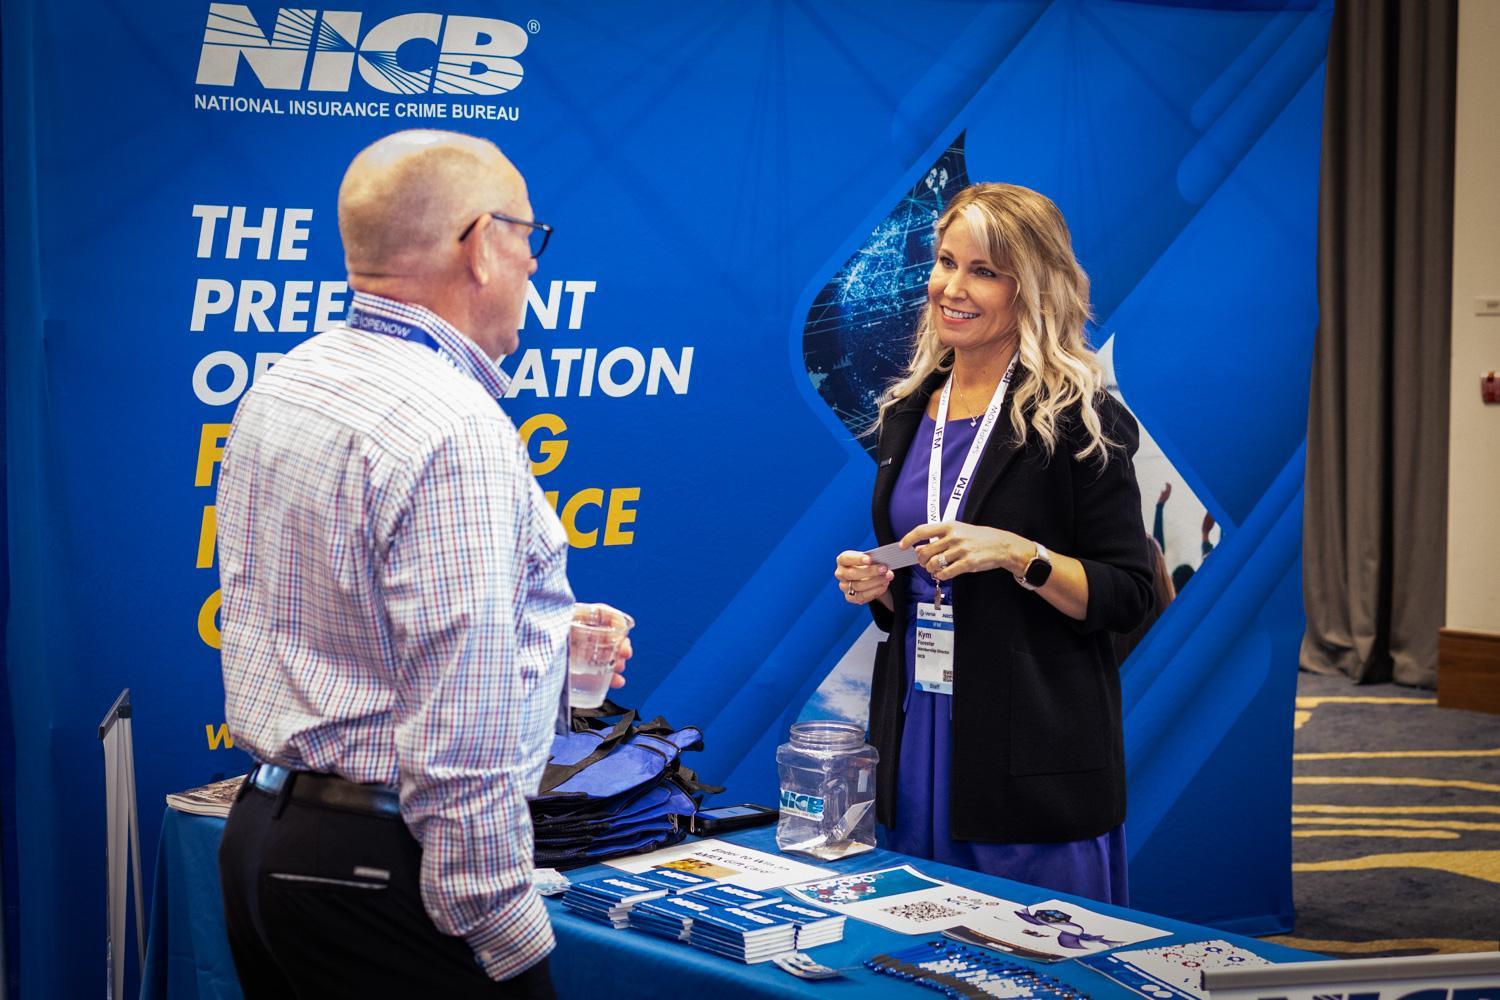 NICB's Kym Forester speaking at an NICB booth